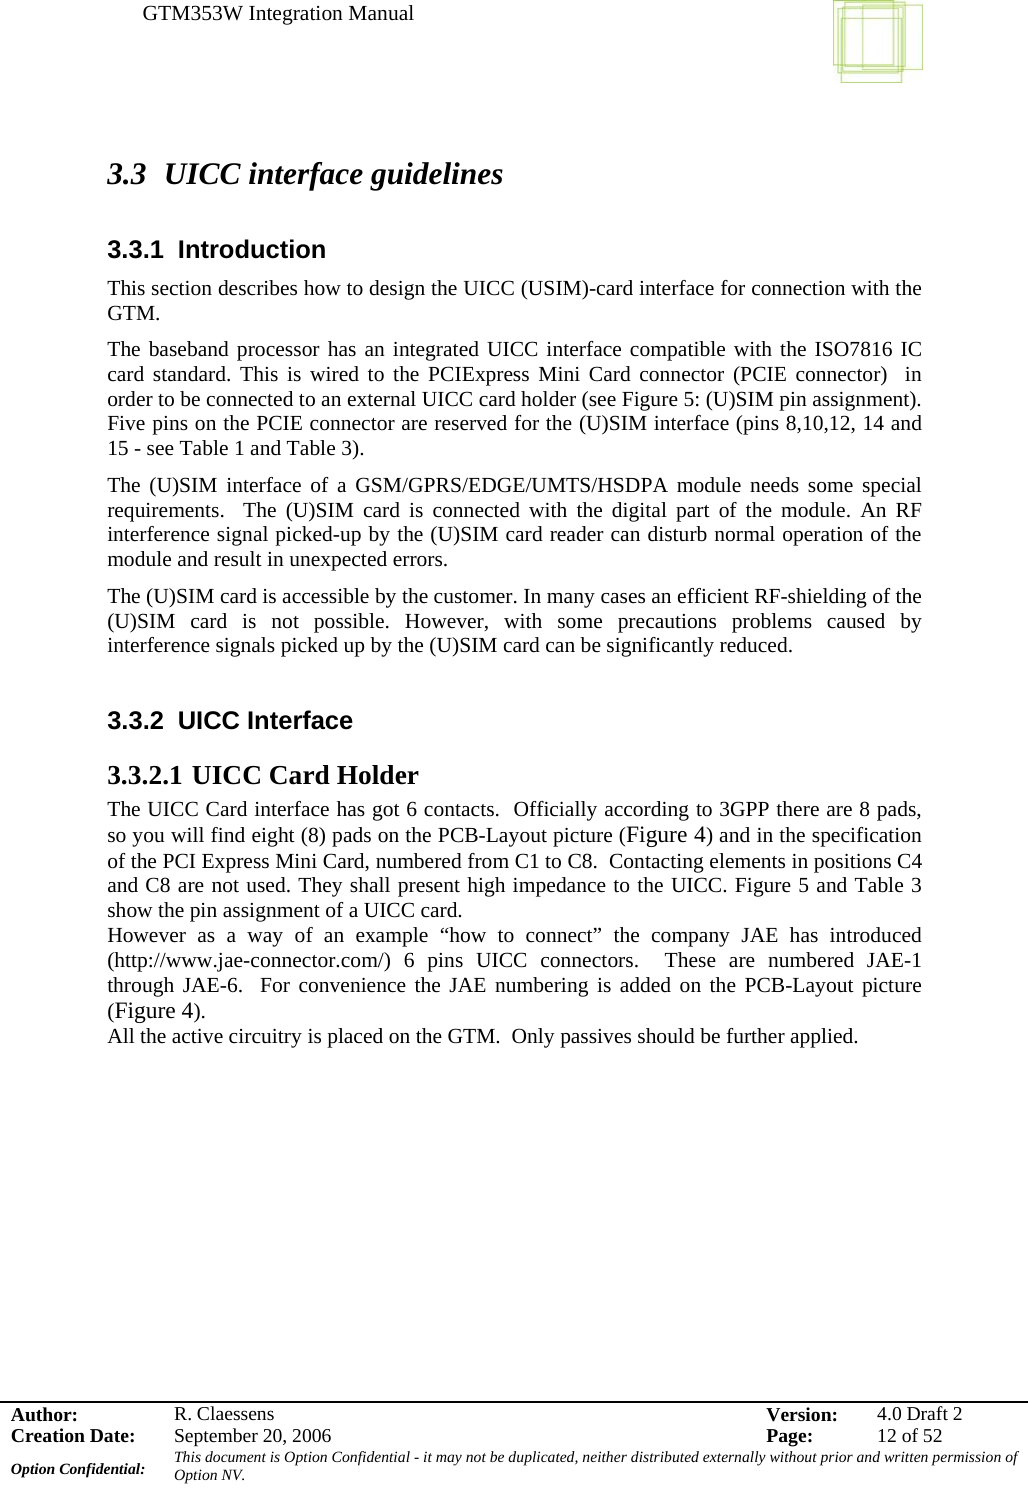 GTM353W Integration Manual      Author: R. Claessens  Version:  4.0 Draft 2Creation Date:  September 20, 2006  Page:  12 of 52 Option Confidential:  This document is Option Confidential - it may not be duplicated, neither distributed externally without prior and written permission of Option NV.    3.3 UICC interface guidelines  3.3.1 Introduction This section describes how to design the UICC (USIM)-card interface for connection with the GTM. The baseband processor has an integrated UICC interface compatible with the ISO7816 IC card standard. This is wired to the PCIExpress Mini Card connector (PCIE connector)  in order to be connected to an external UICC card holder (see Figure 5: (U)SIM pin assignment). Five pins on the PCIE connector are reserved for the (U)SIM interface (pins 8,10,12, 14 and 15 - see Table 1 and Table 3).  The (U)SIM interface of a GSM/GPRS/EDGE/UMTS/HSDPA module needs some special requirements.  The (U)SIM card is connected with the digital part of the module. An RF interference signal picked-up by the (U)SIM card reader can disturb normal operation of the module and result in unexpected errors. The (U)SIM card is accessible by the customer. In many cases an efficient RF-shielding of the (U)SIM card is not possible. However, with some precautions problems caused by interference signals picked up by the (U)SIM card can be significantly reduced.  3.3.2 UICC Interface 3.3.2.1 UICC Card Holder The UICC Card interface has got 6 contacts.  Officially according to 3GPP there are 8 pads, so you will find eight (8) pads on the PCB-Layout picture (Figure 4) and in the specification of the PCI Express Mini Card, numbered from C1 to C8.  Contacting elements in positions C4 and C8 are not used. They shall present high impedance to the UICC. Figure 5 and Table 3 show the pin assignment of a UICC card. However as a way of an example “how to connect” the company JAE has introduced (http://www.jae-connector.com/) 6 pins UICC connectors.  These are numbered JAE-1 through JAE-6.  For convenience the JAE numbering is added on the PCB-Layout picture (Figure 4). All the active circuitry is placed on the GTM.  Only passives should be further applied.  